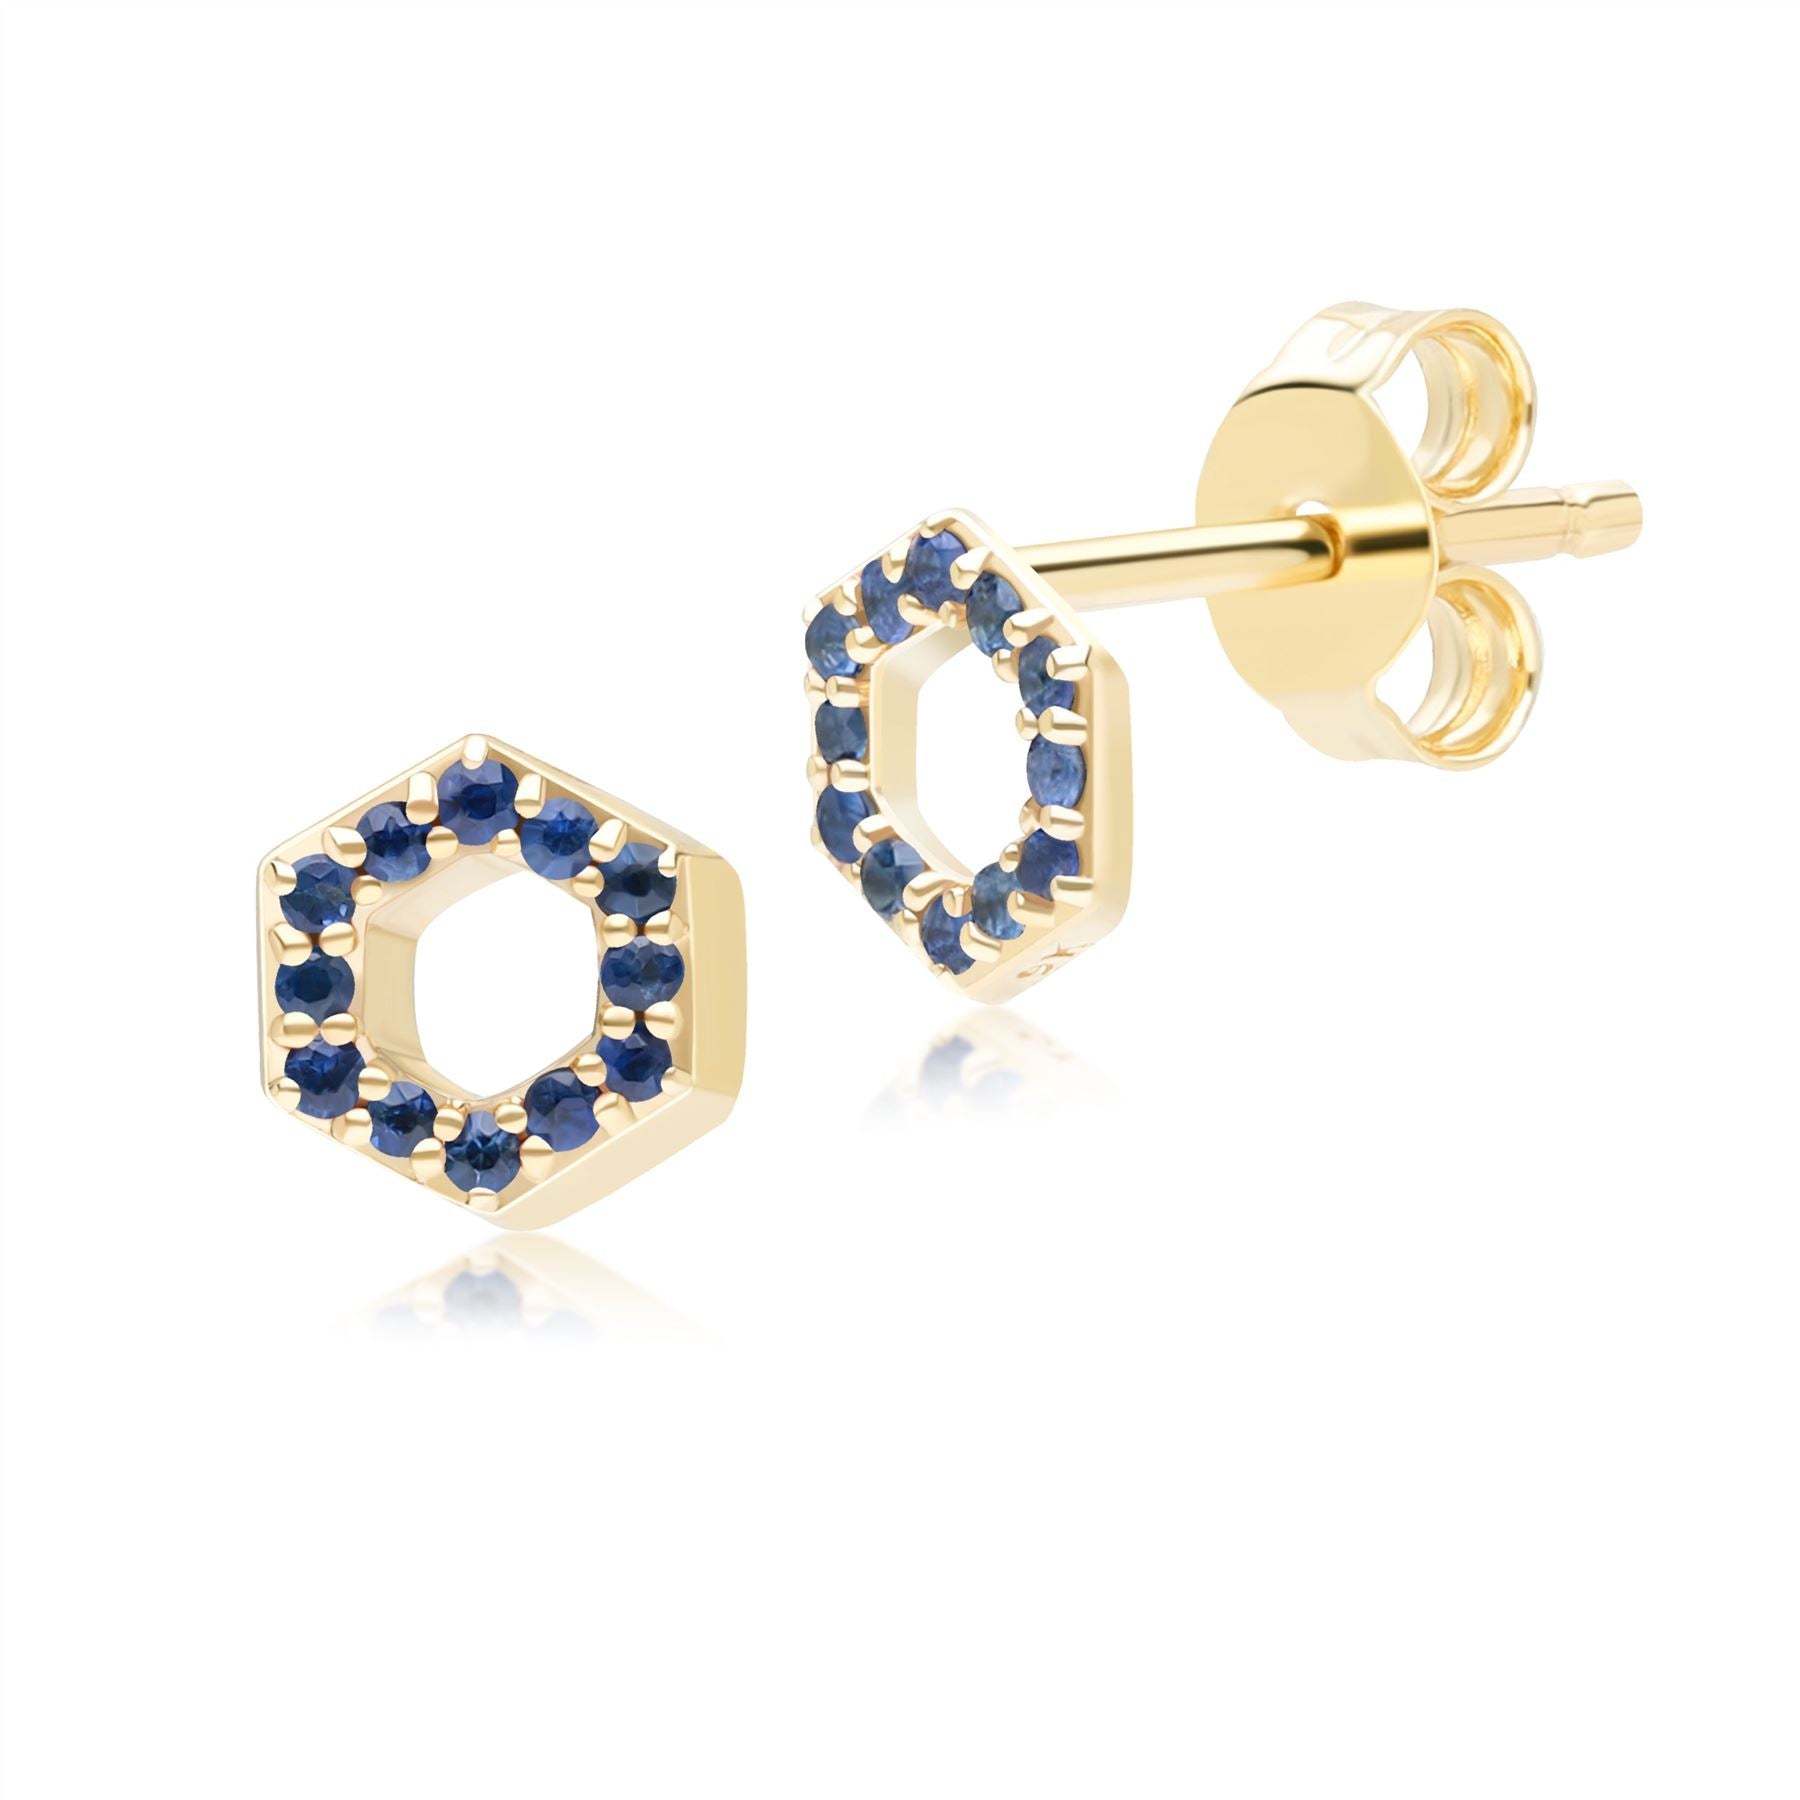 Geometric Hex Sapphire Stud Earrings in 9ct Yellow Gold Front